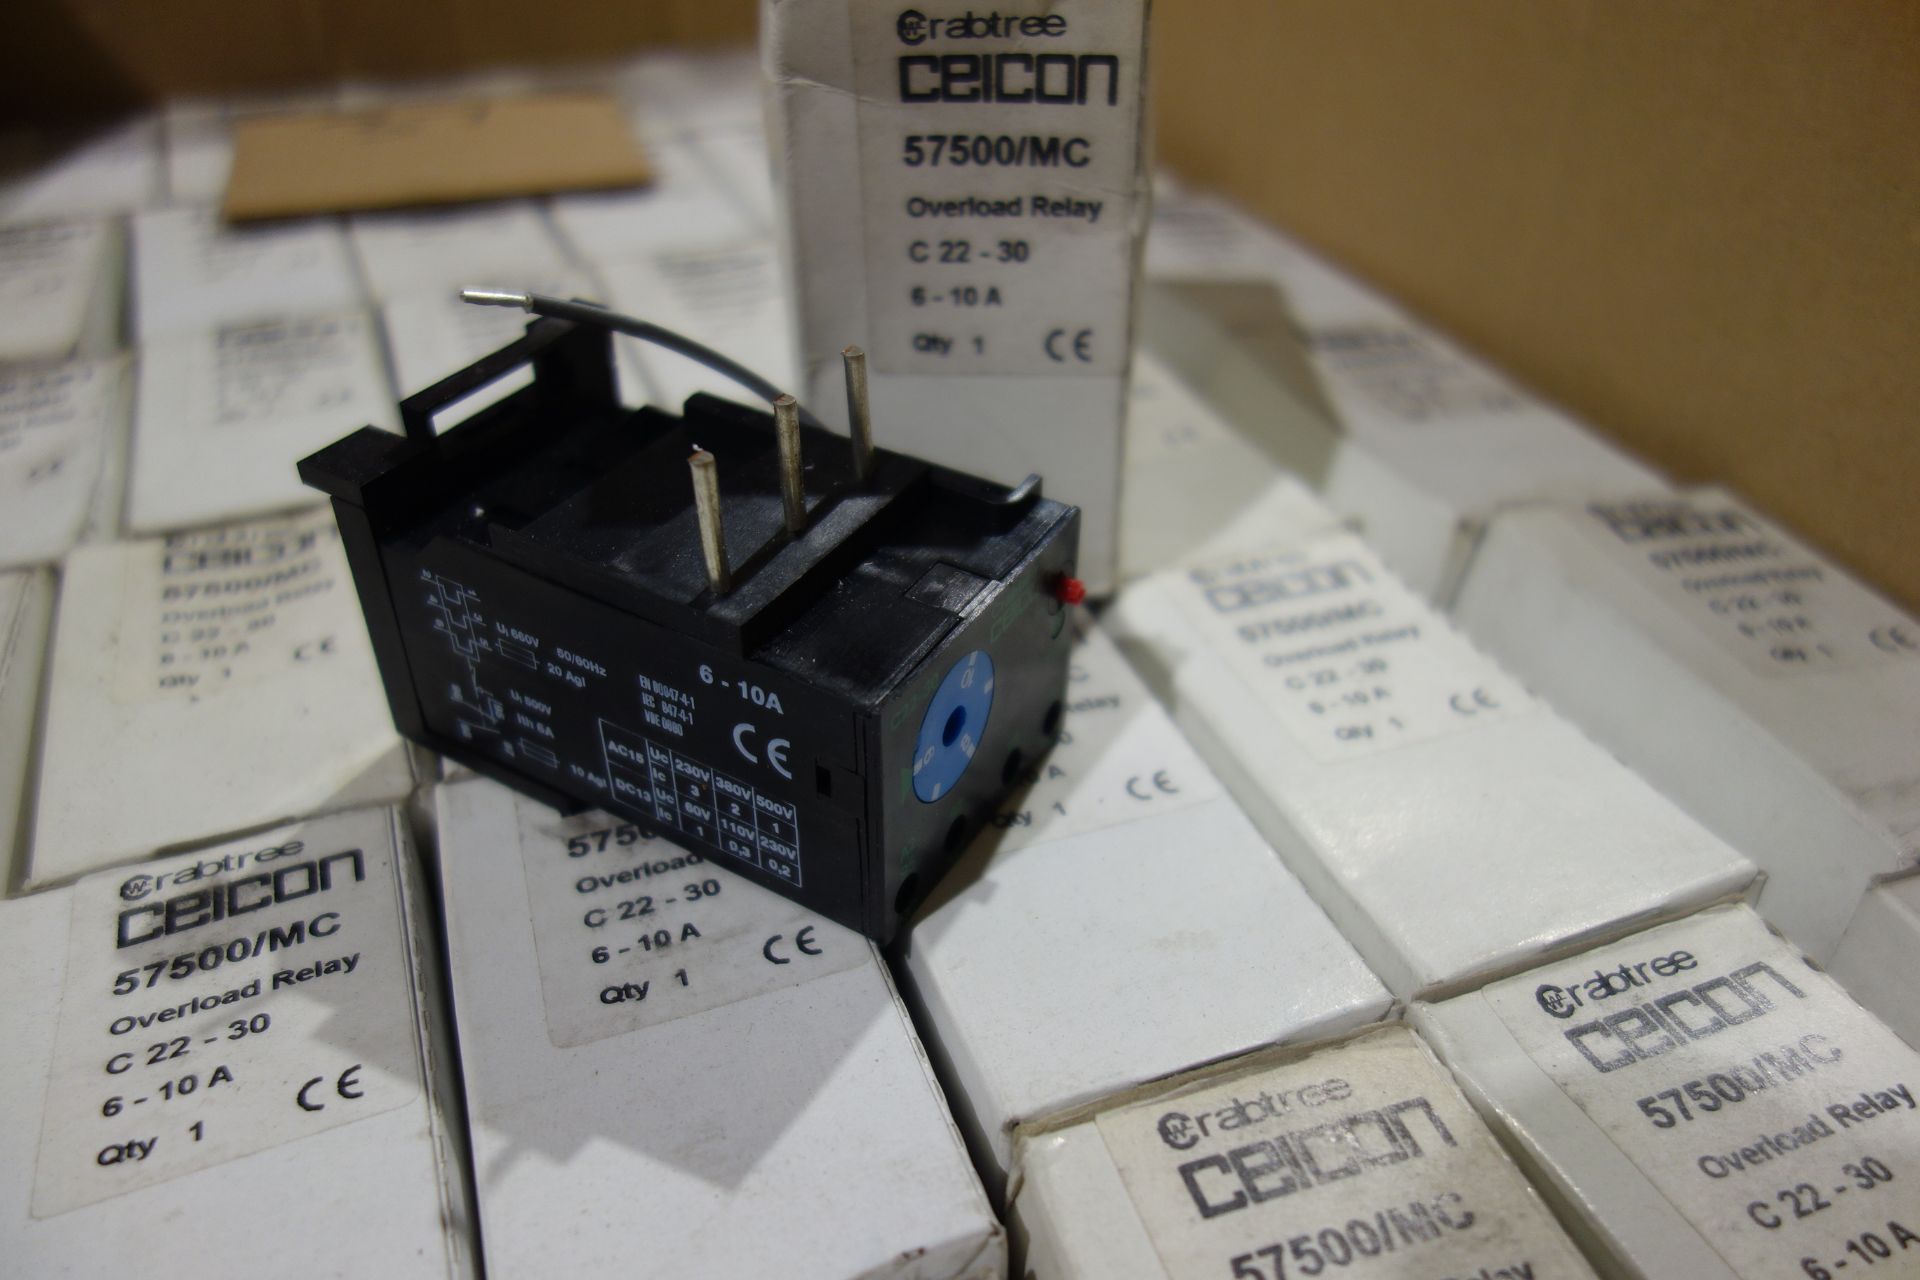 1 x Box of CRABTREE Ceicon 57500/MC Overload Relays C22 - 30 6-10A Approx 75 +